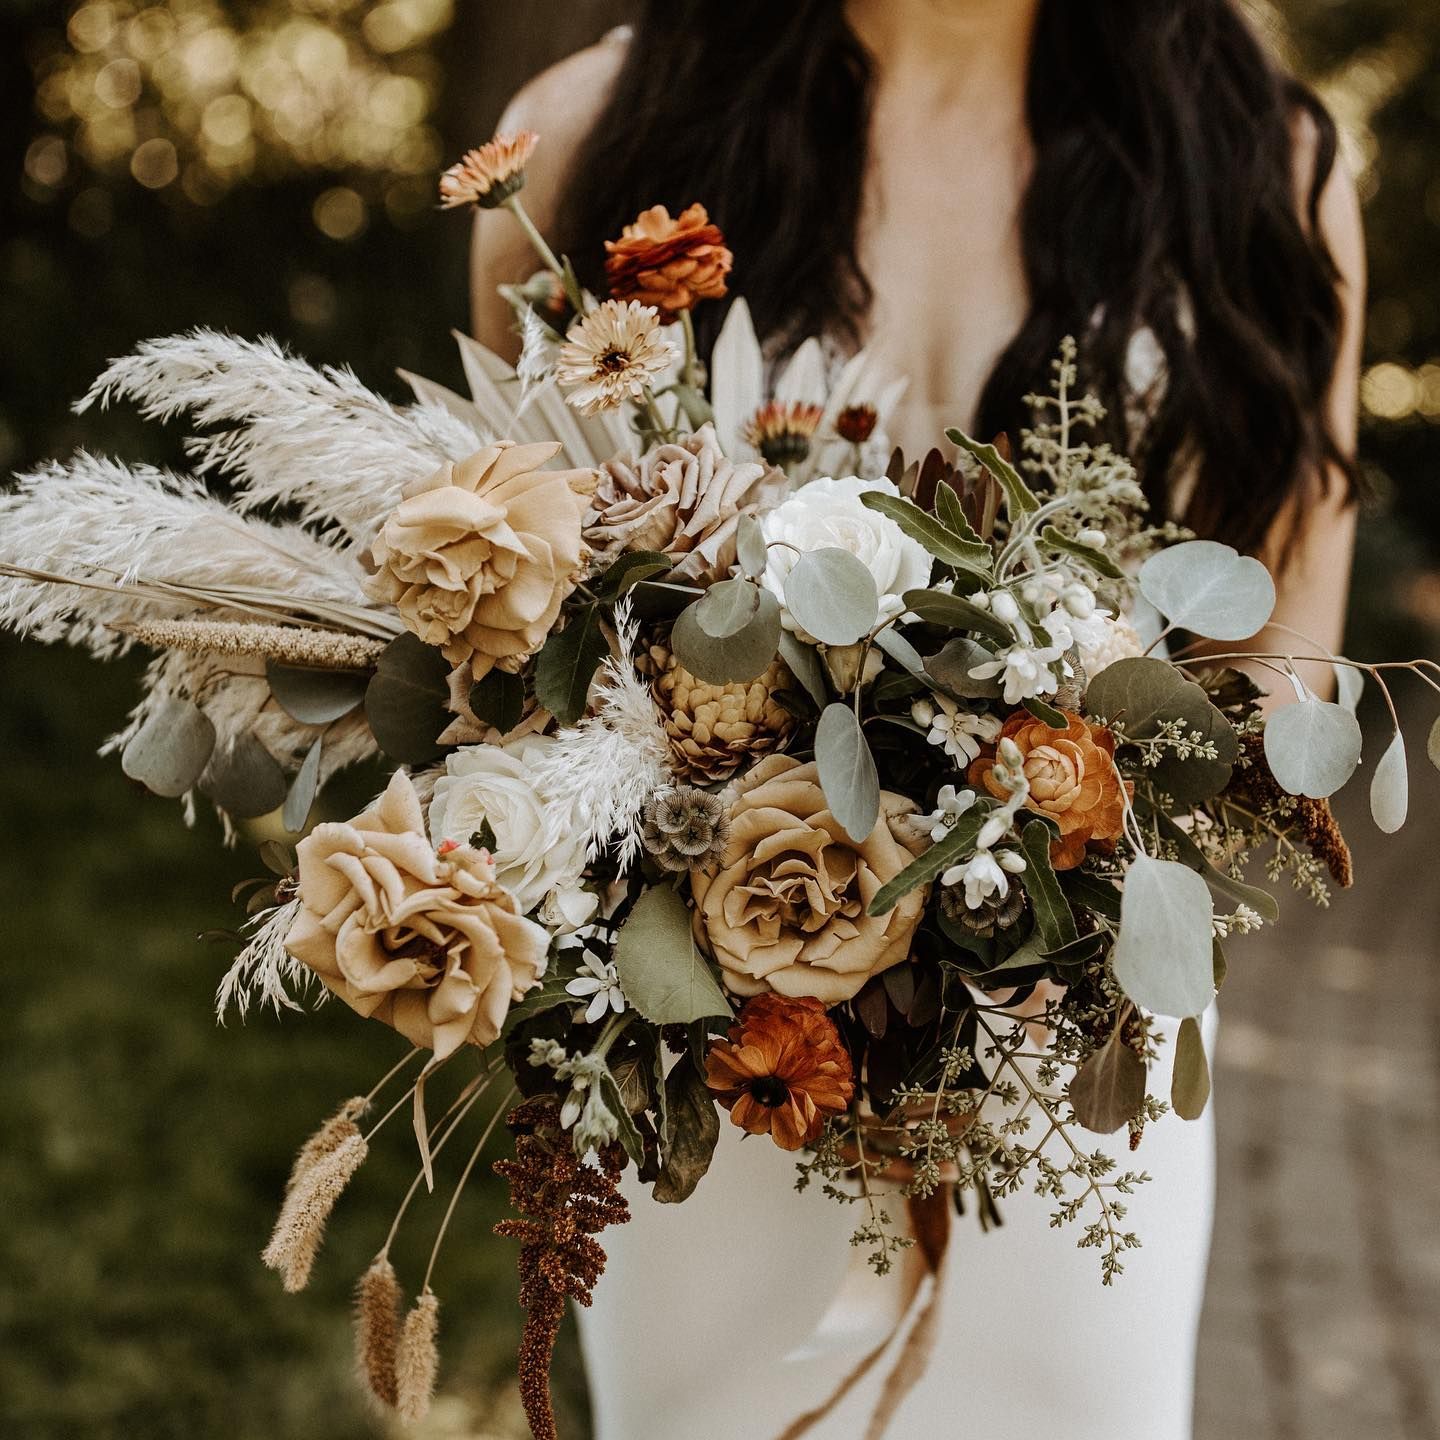 The Top 7 Wedding Flower Ideas & Trends for 2022